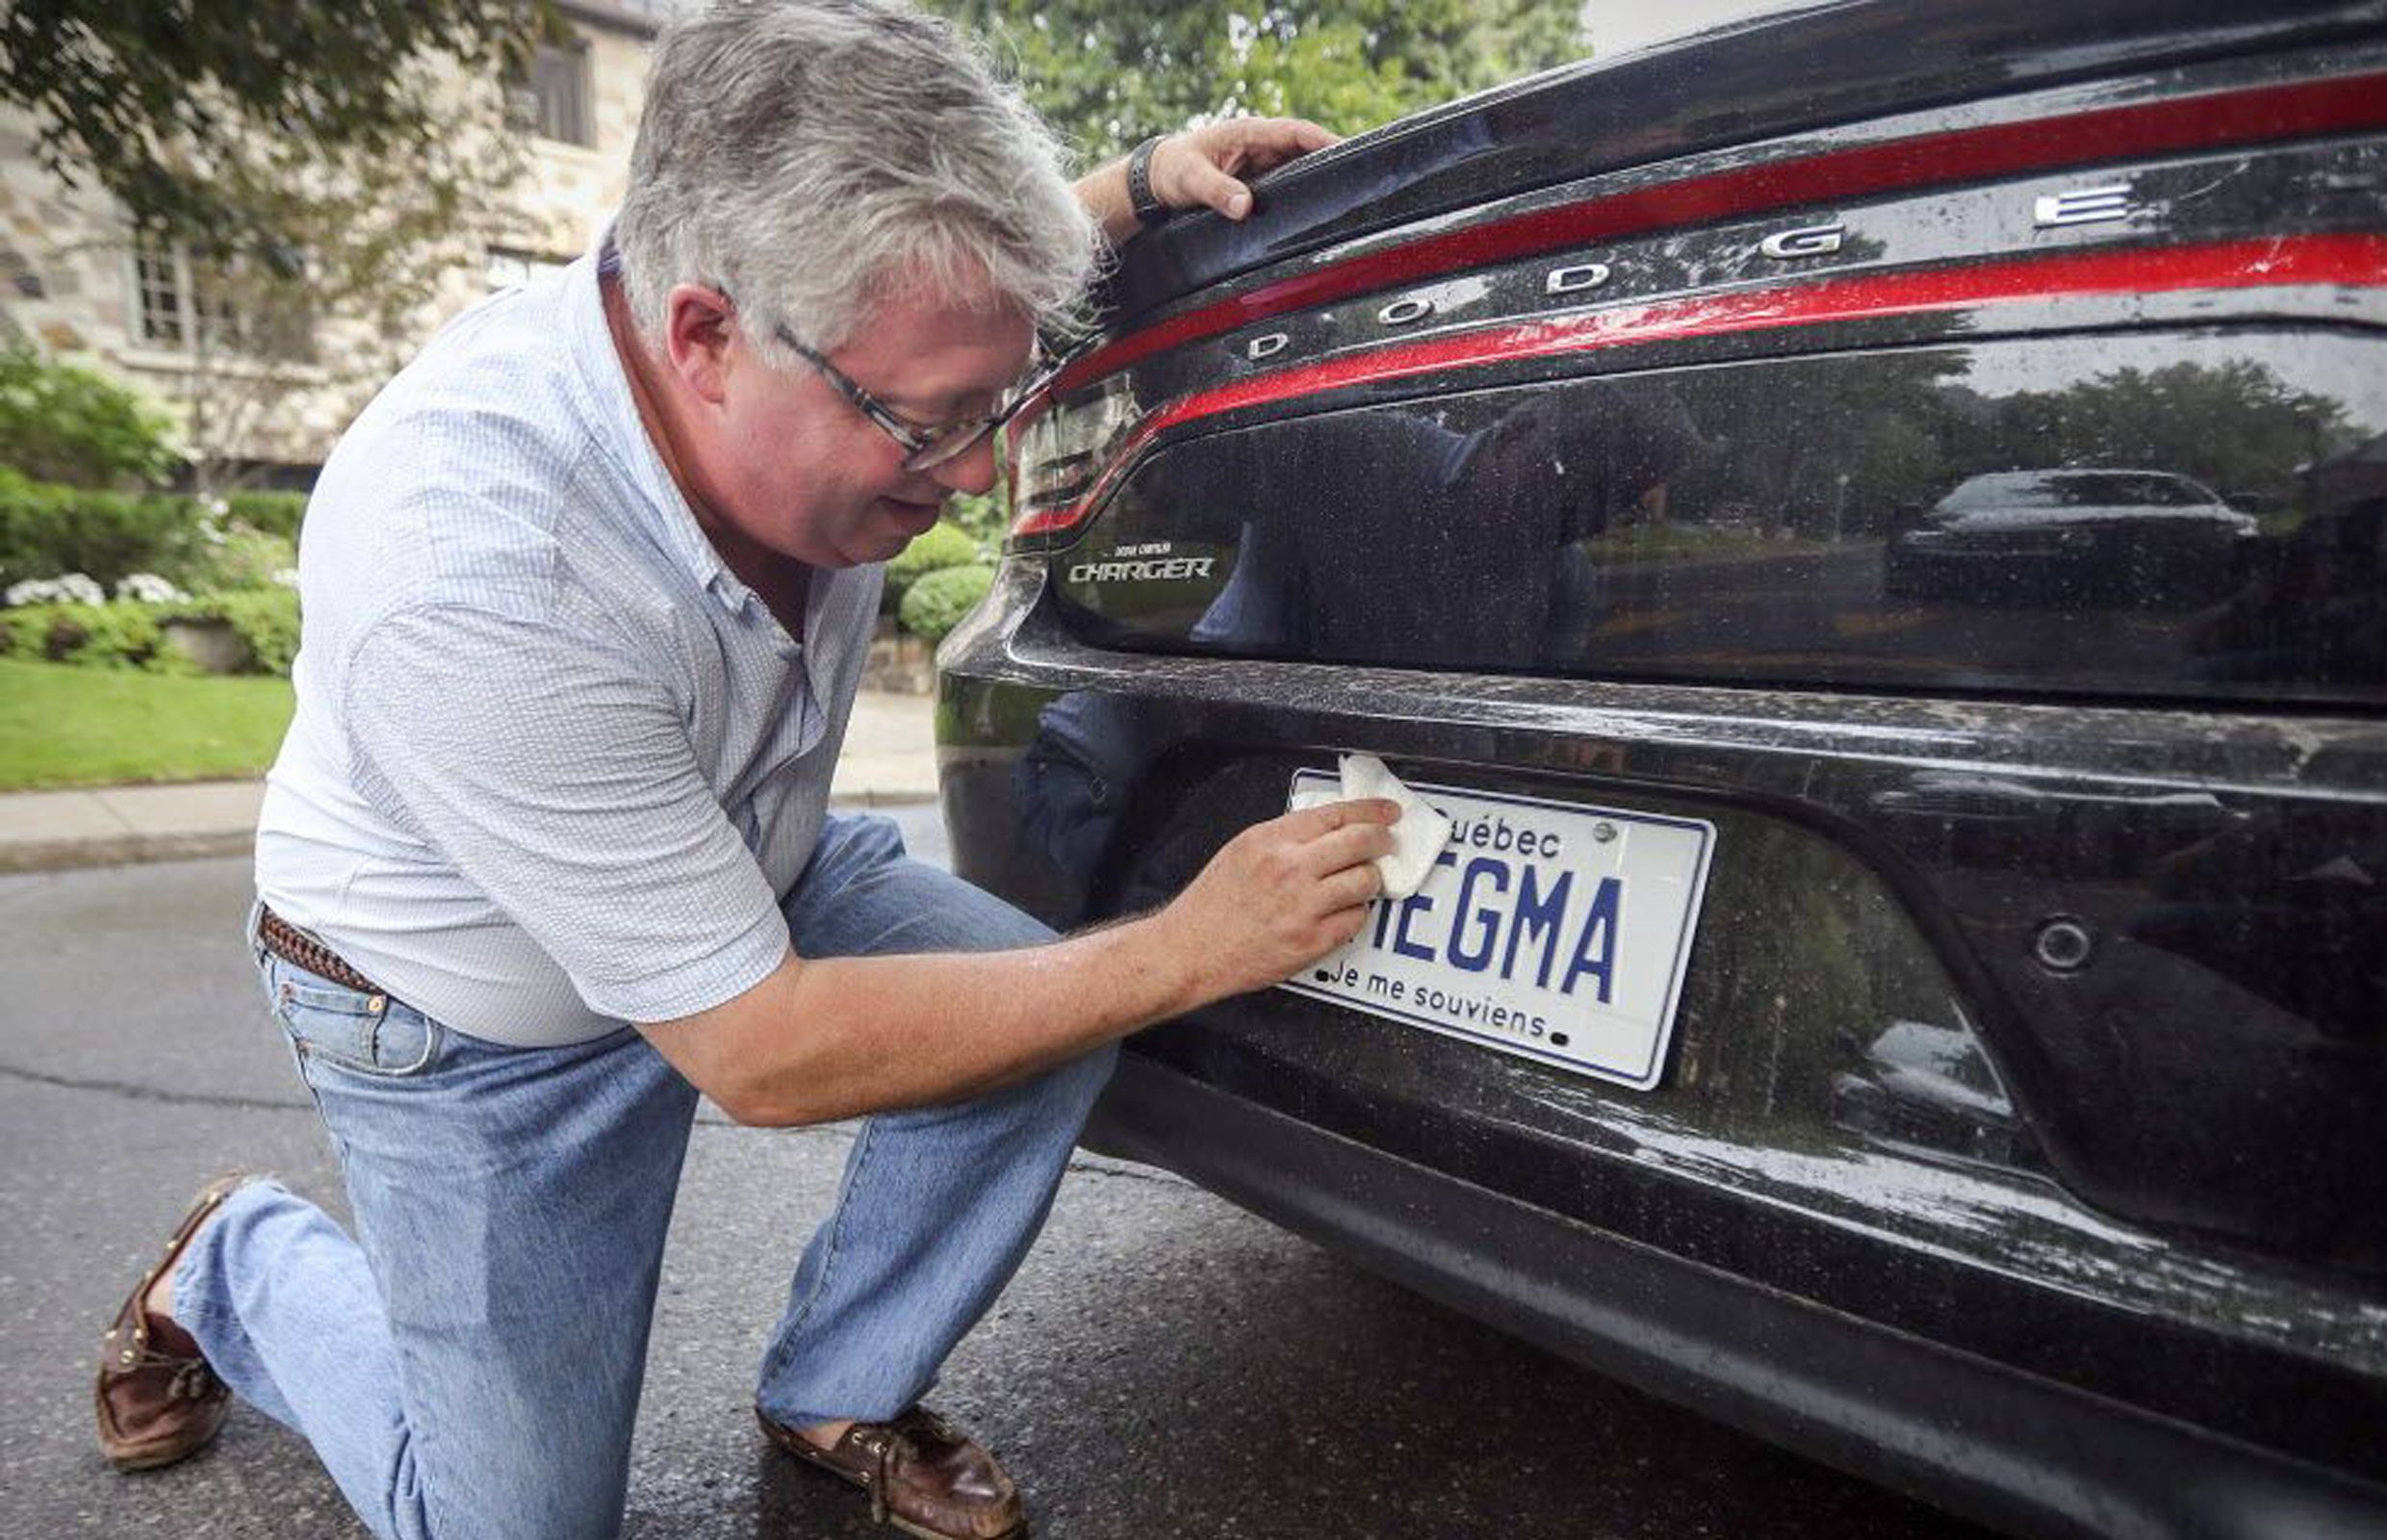 These 10 custom licence plates were taken back after the DMV got wise